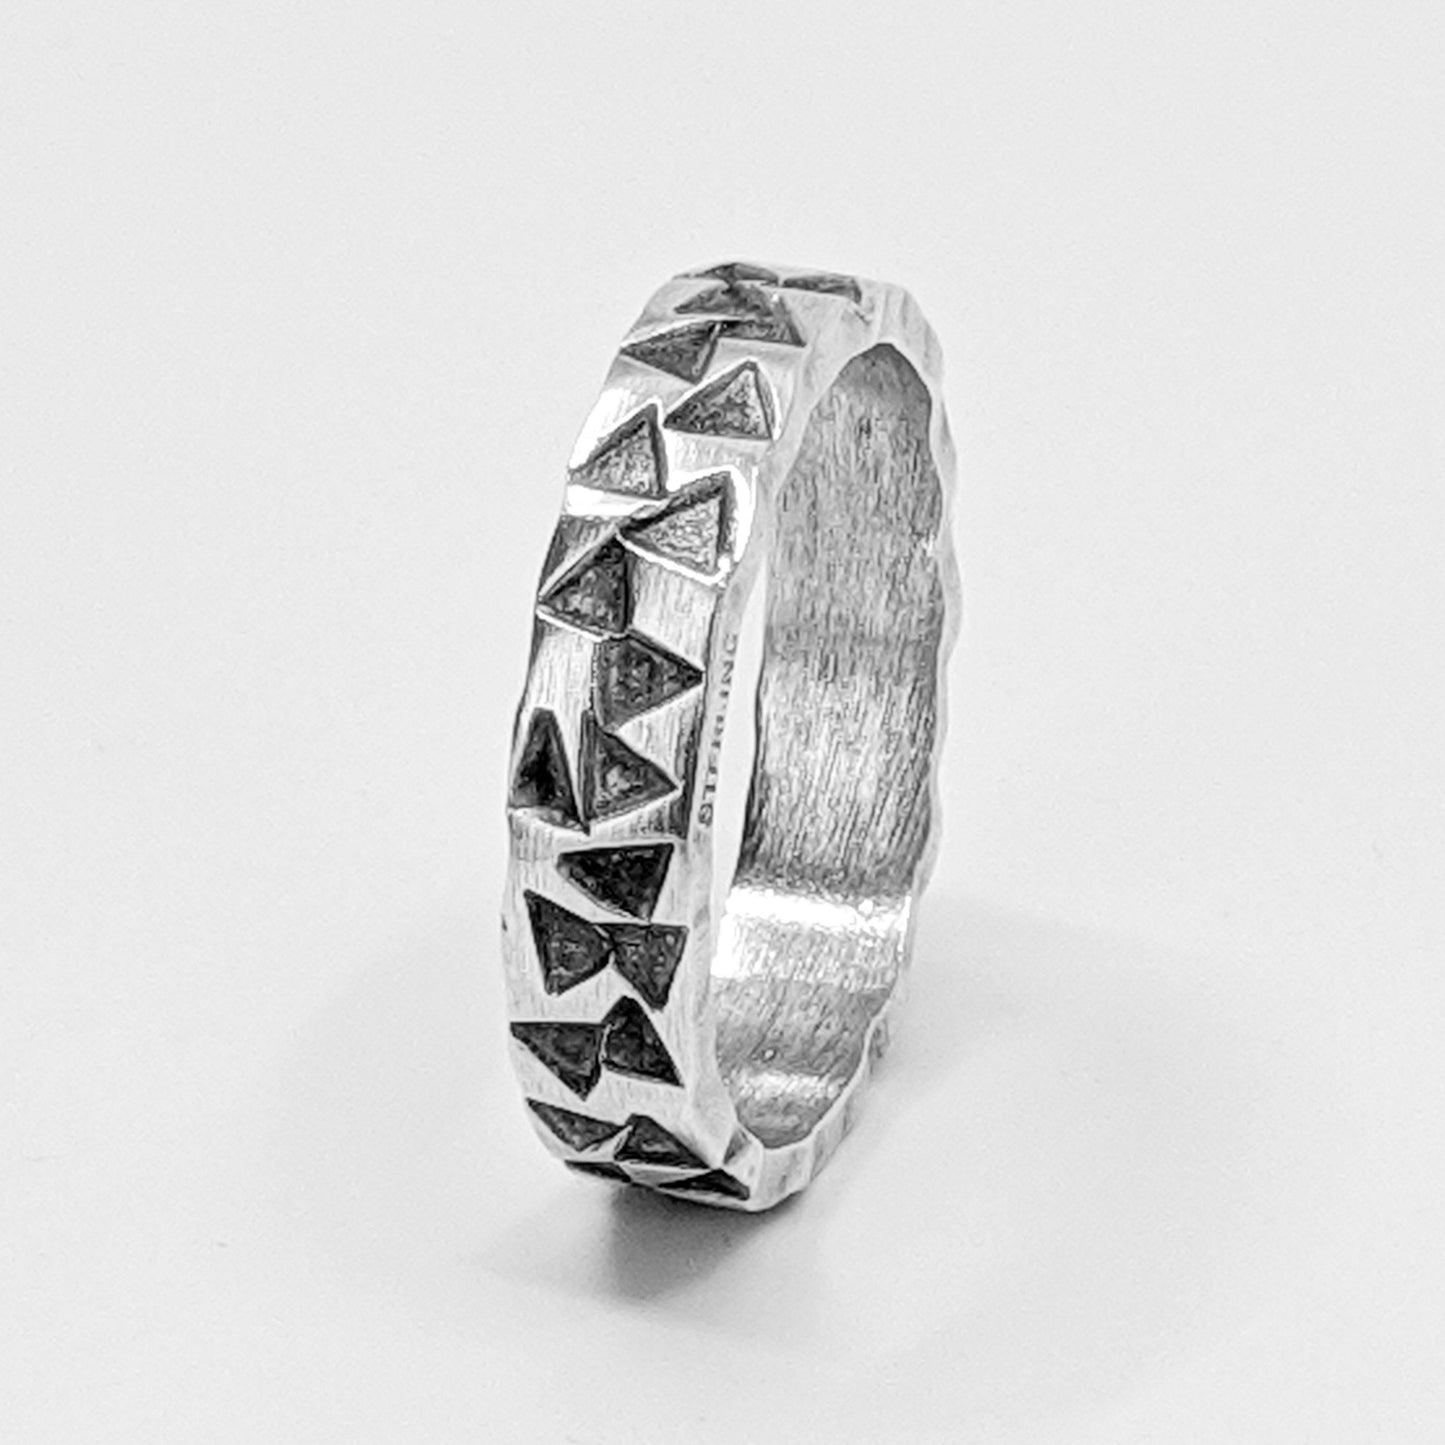 Sterling Silver Ring - Narrow Band - Size 13 - Kristin Christopher